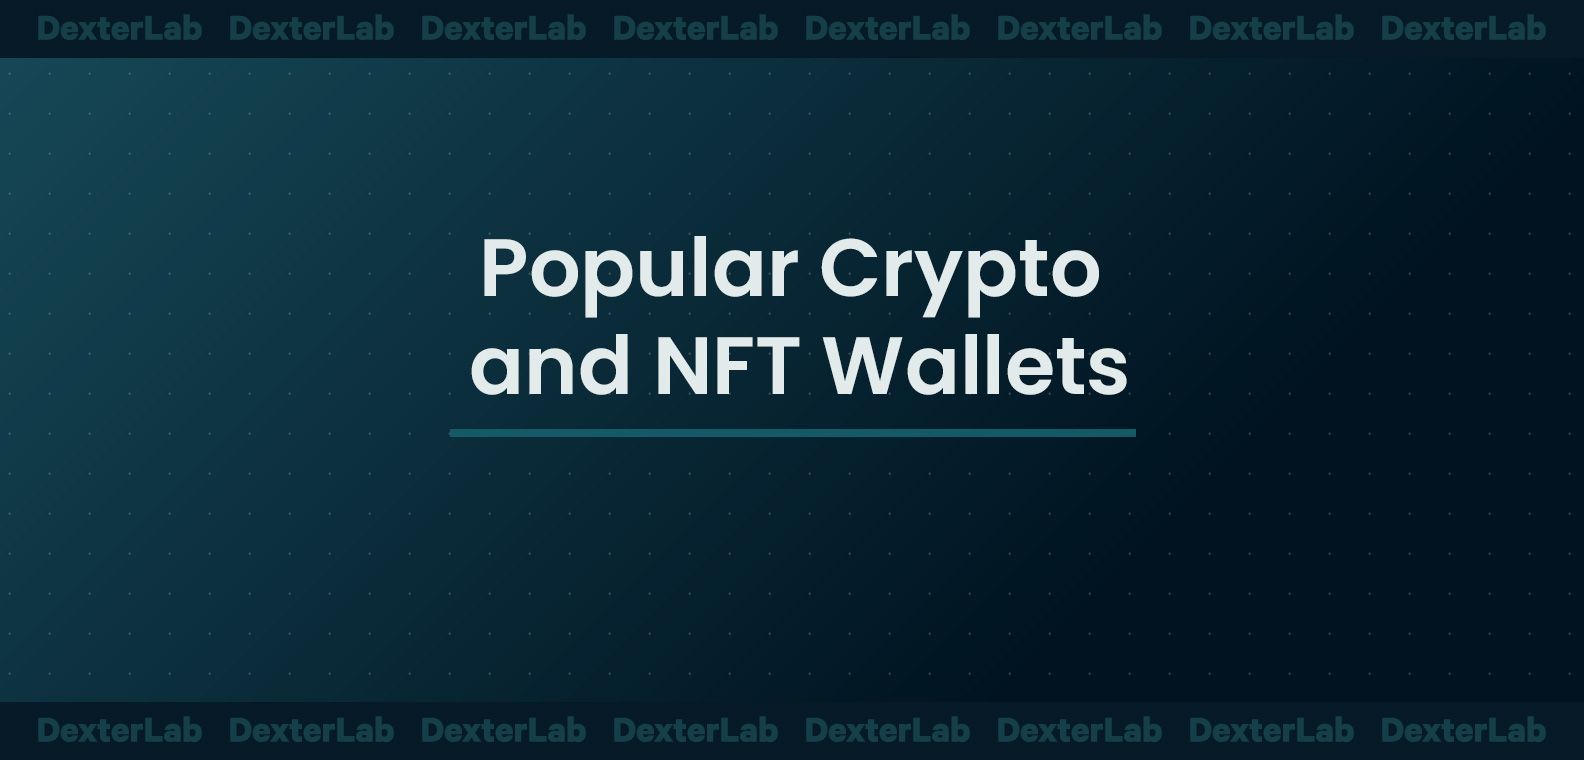 Popular Crypto and NFT Wallets